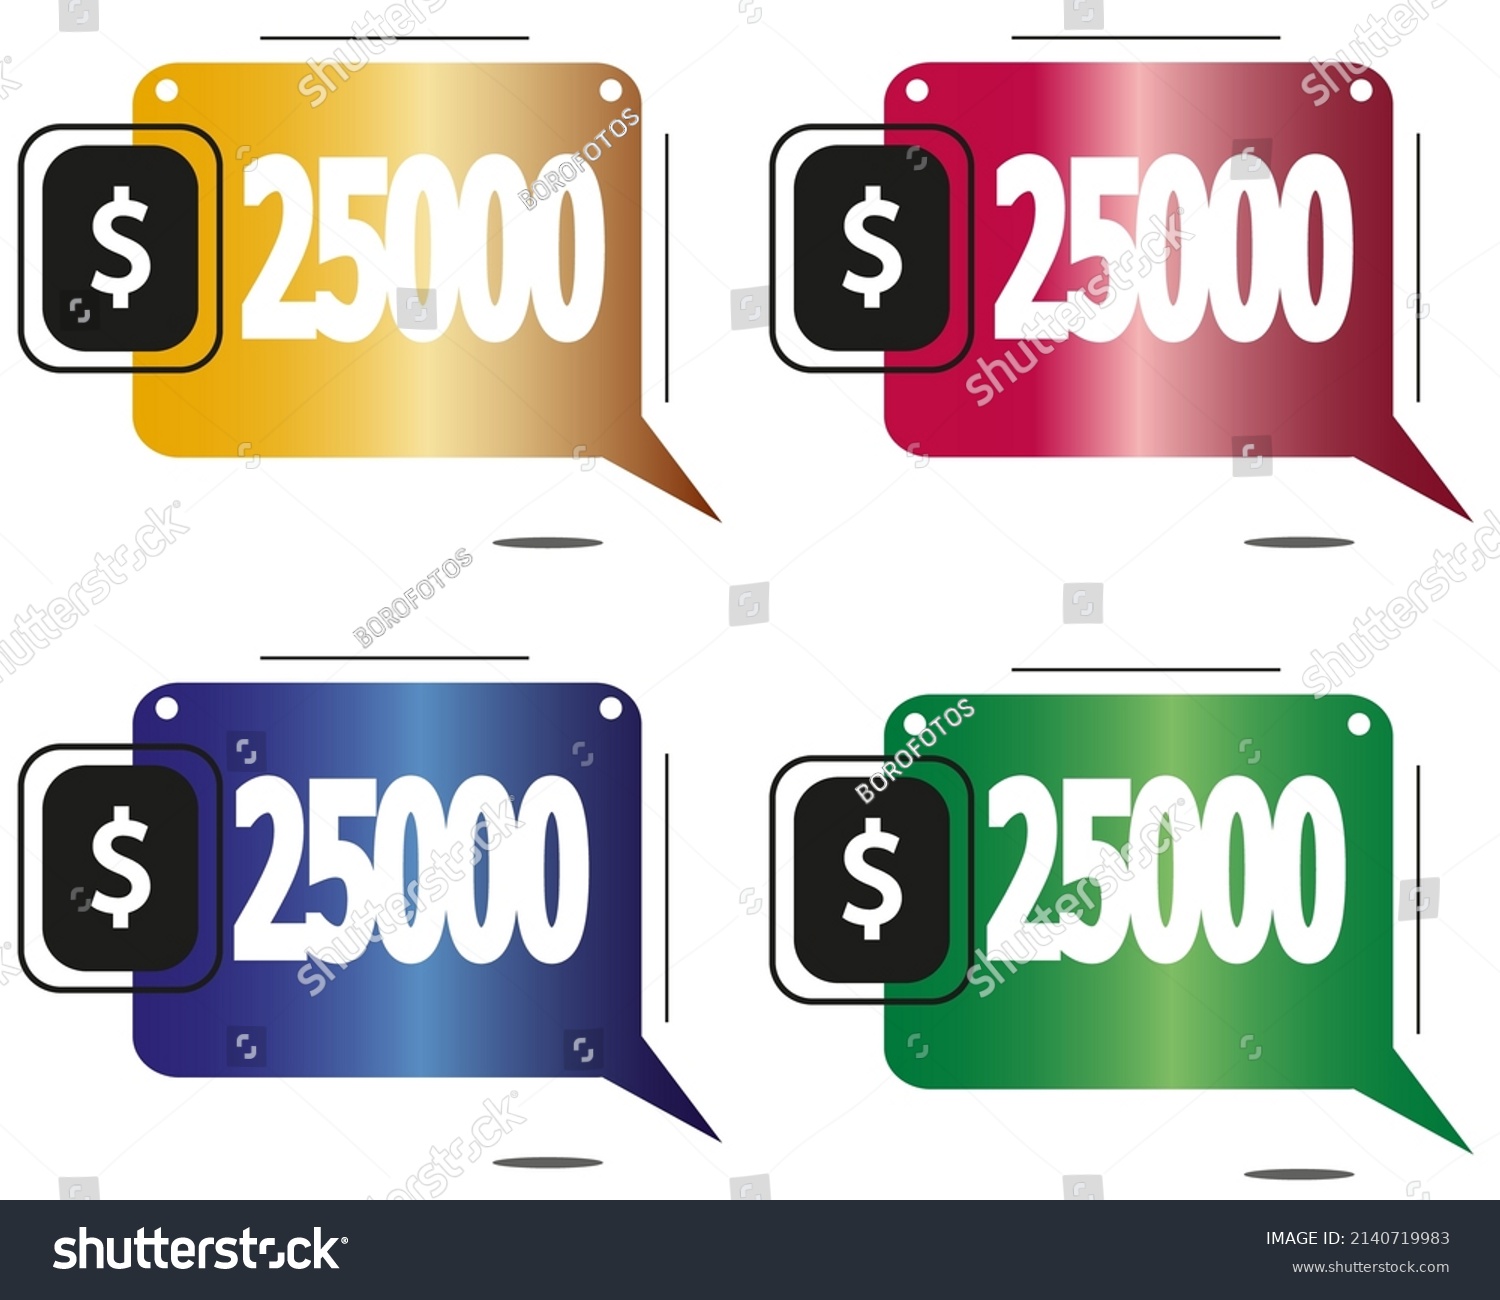 SVG of $25000 dollars price. Yellow, red, blue and green coin labels. vector for sales and purchase svg